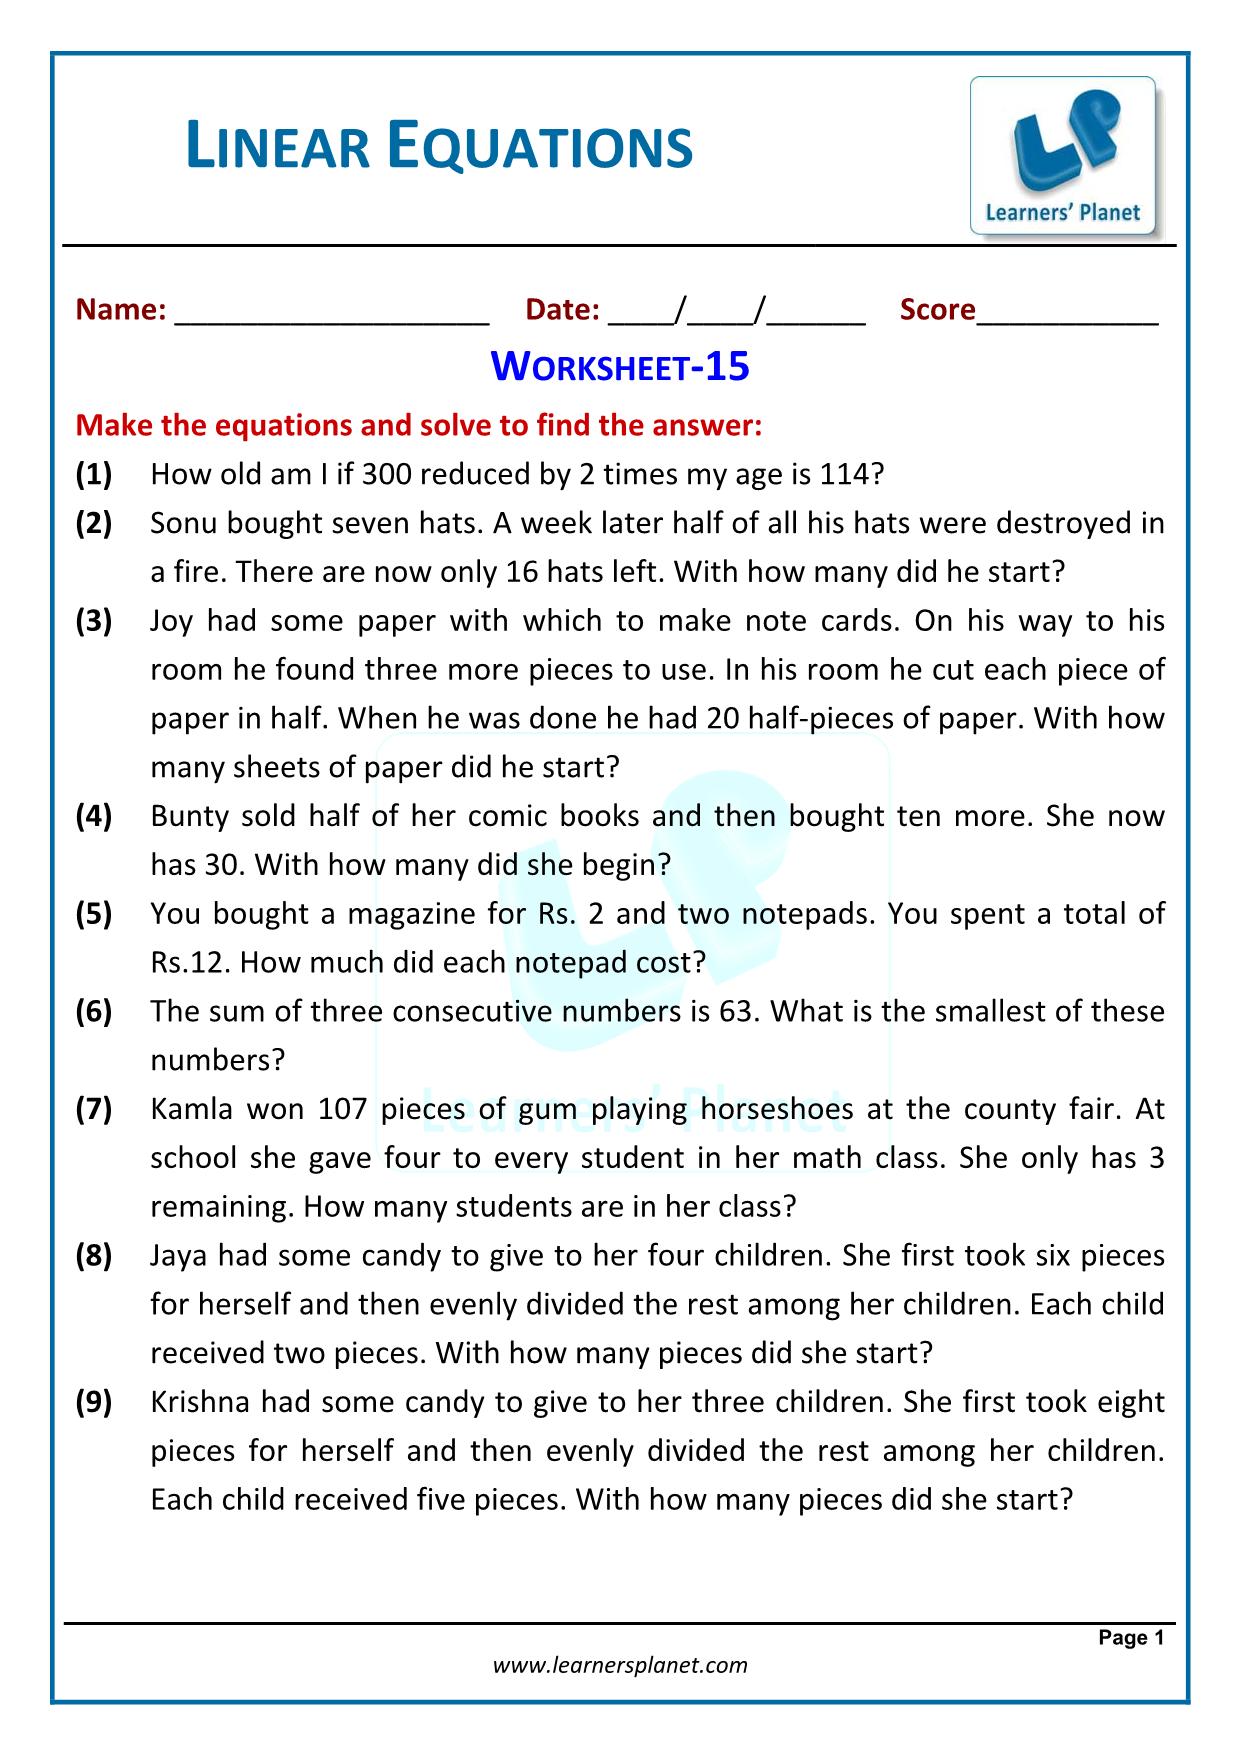 Linear equation word problems worksheet with answer With Linear Equation Word Problems Worksheet